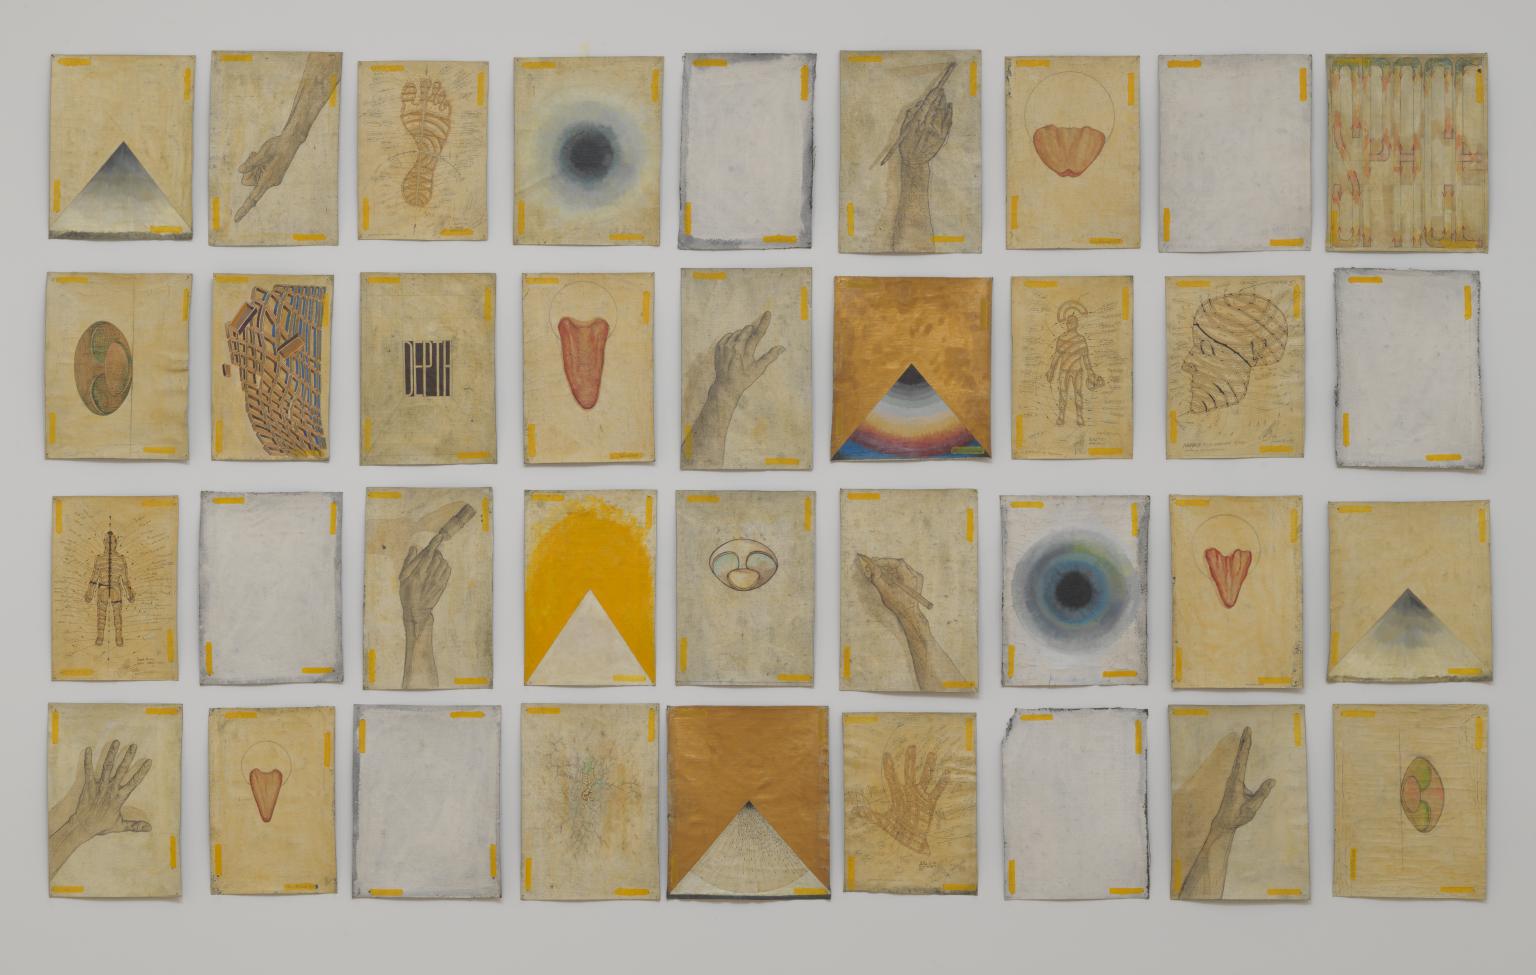 a mixed media work, a grid of 36 squares containing images of various motifs, including hands, eye-forms, and pyramids